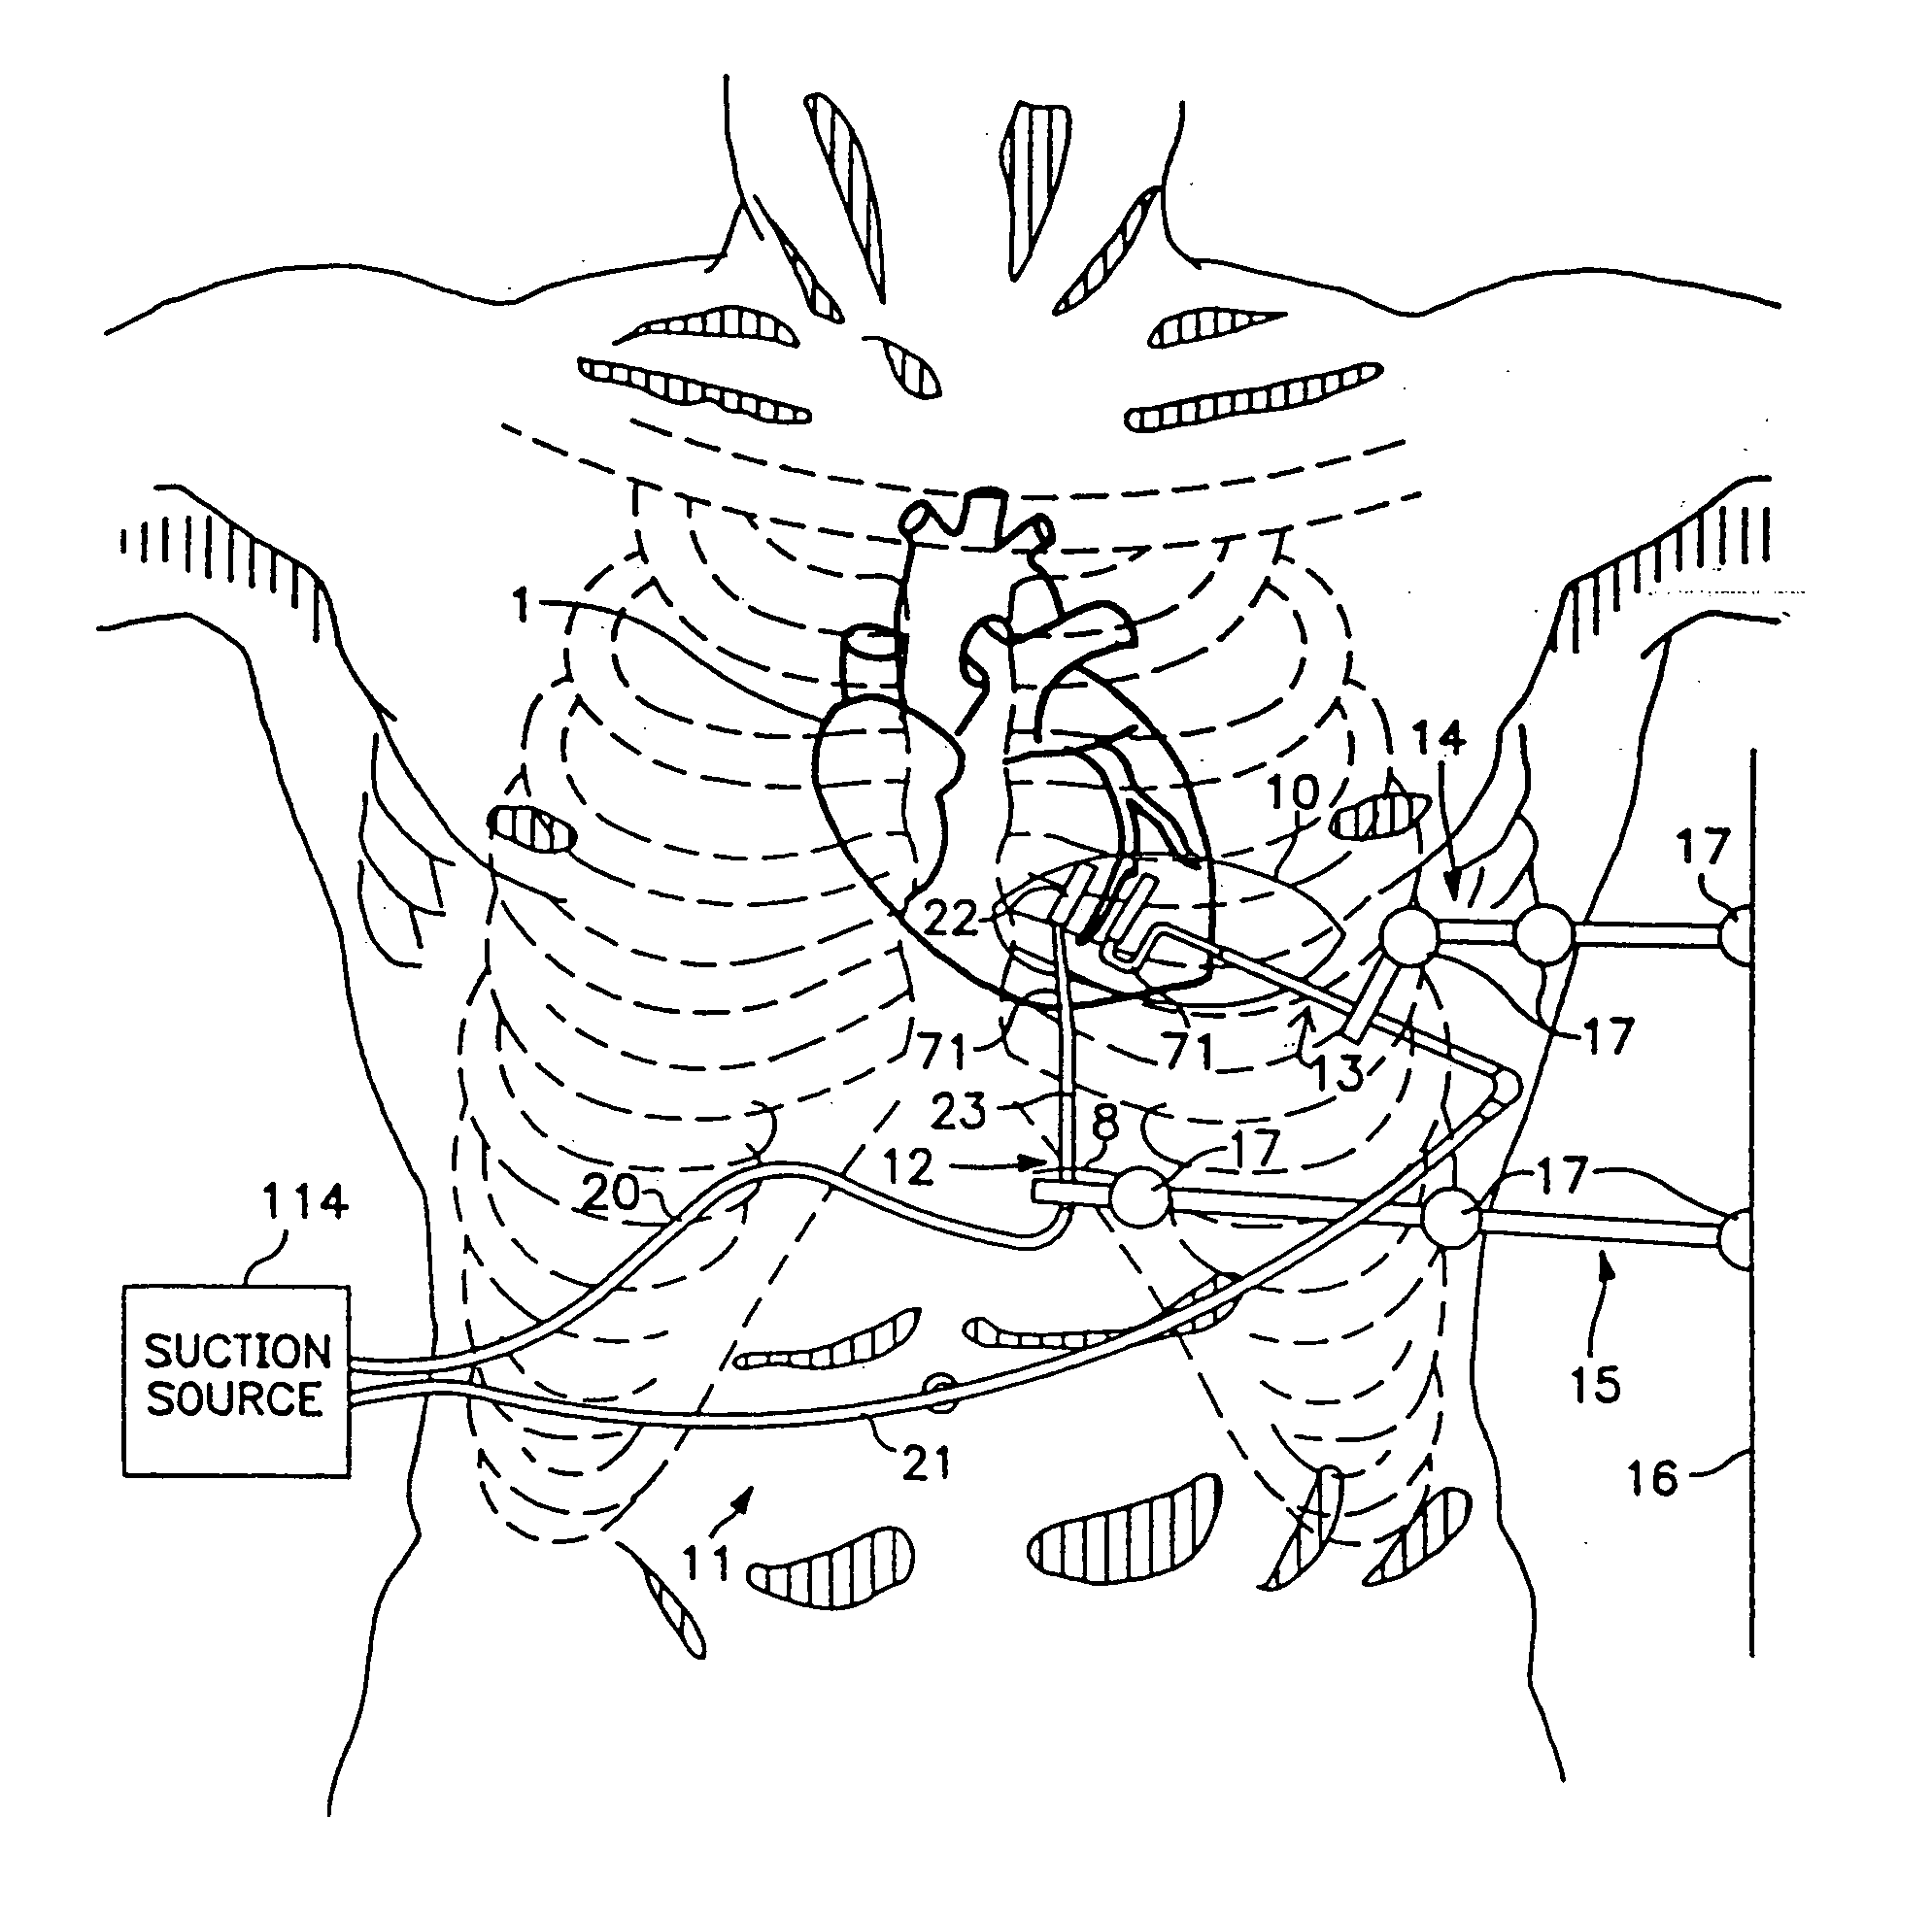 Method and apparatus for temporarily immobilizing a local area of tissue